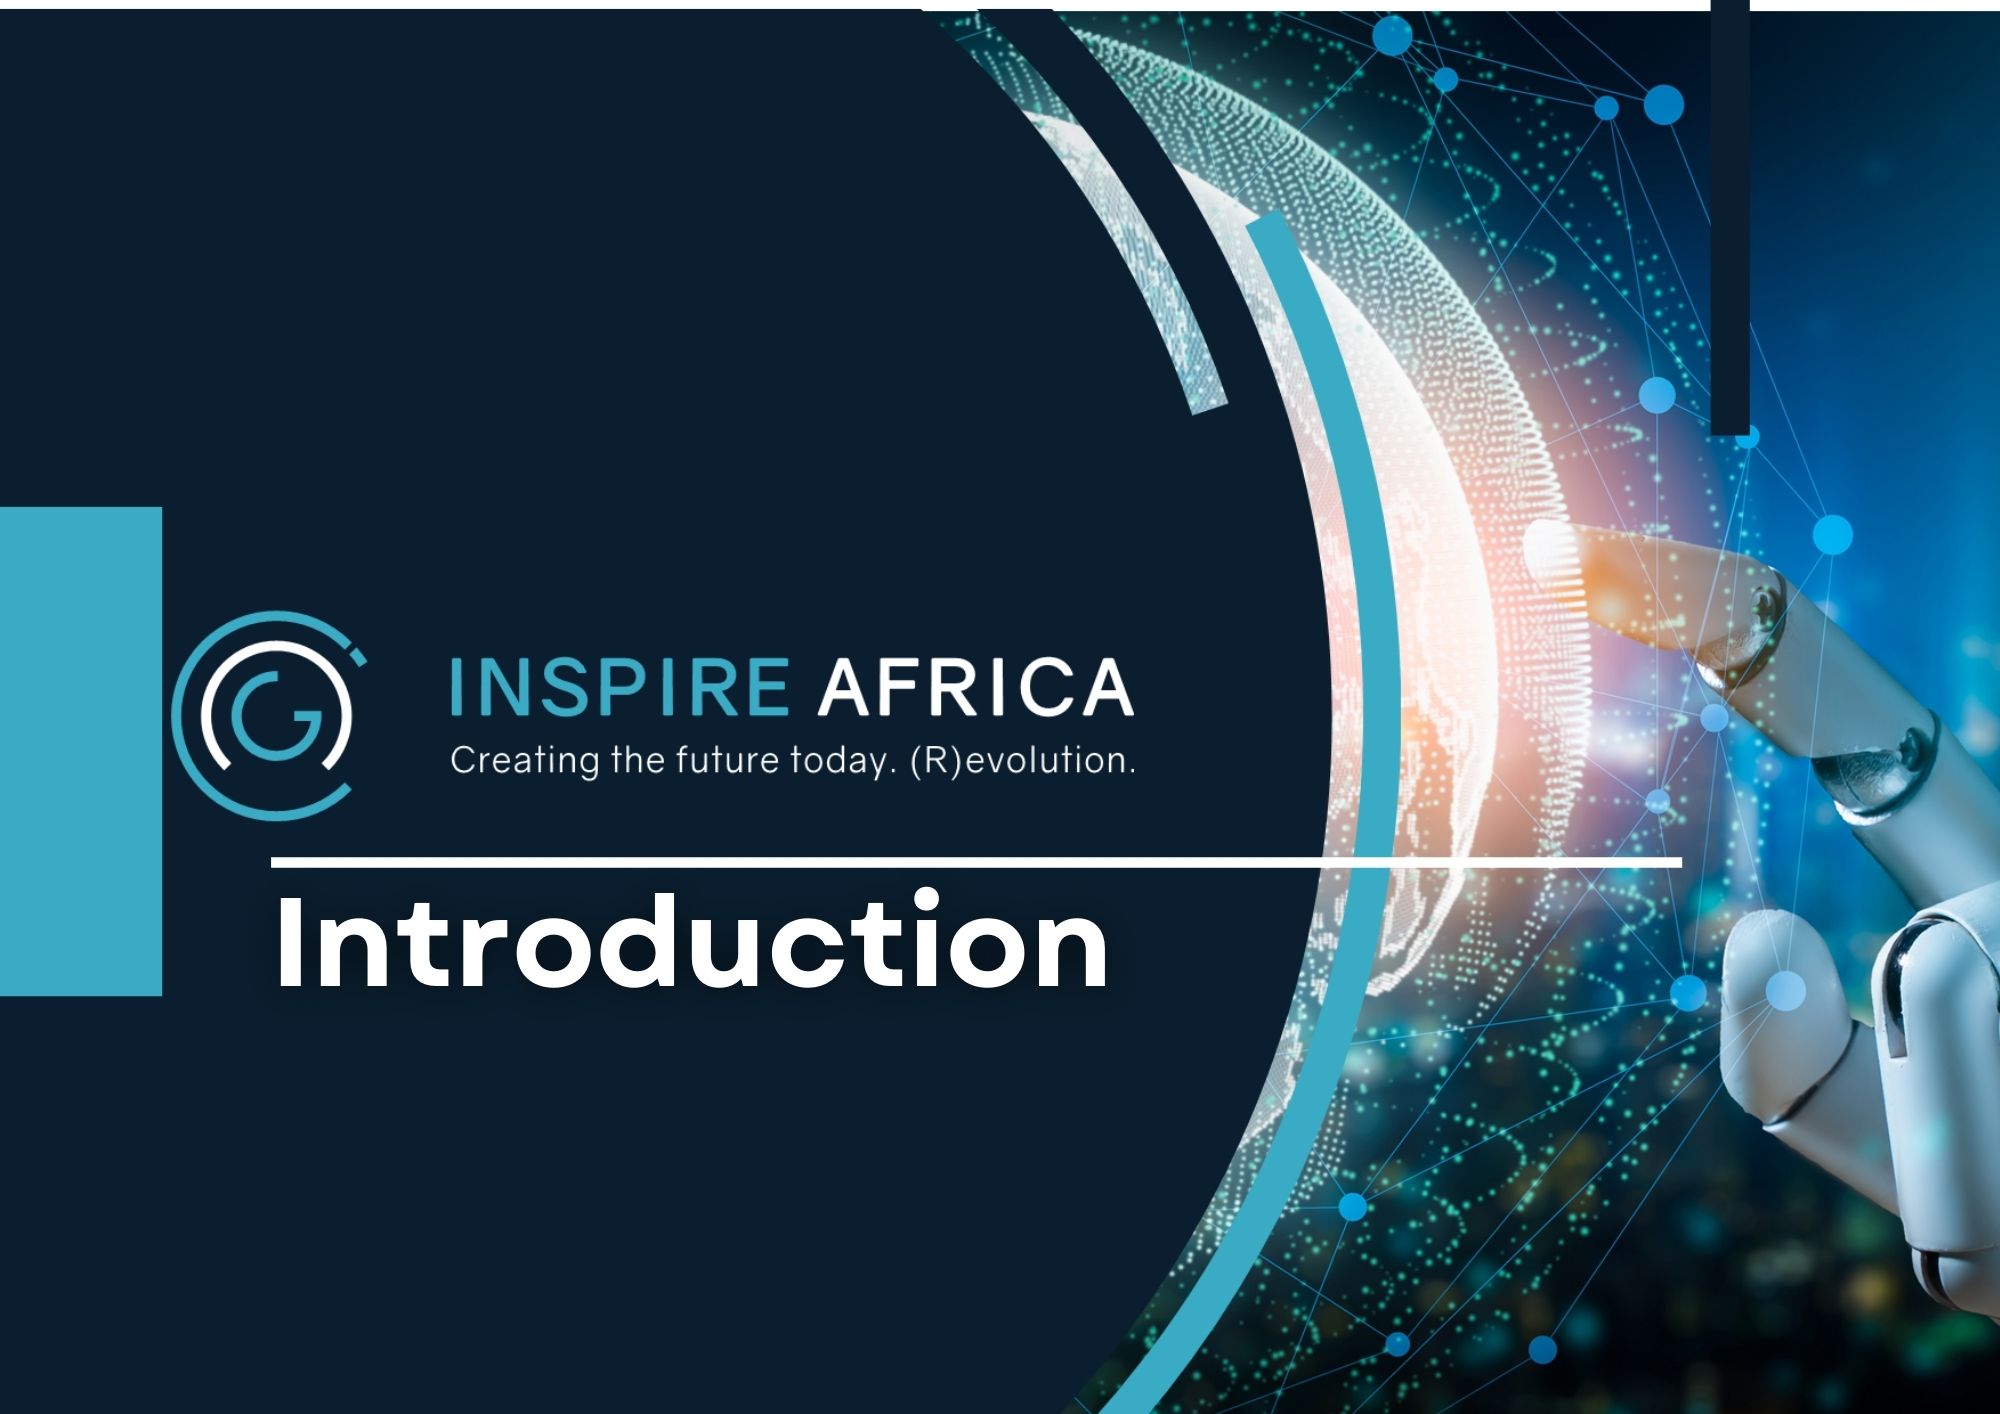 An introduction to Inspire Africa